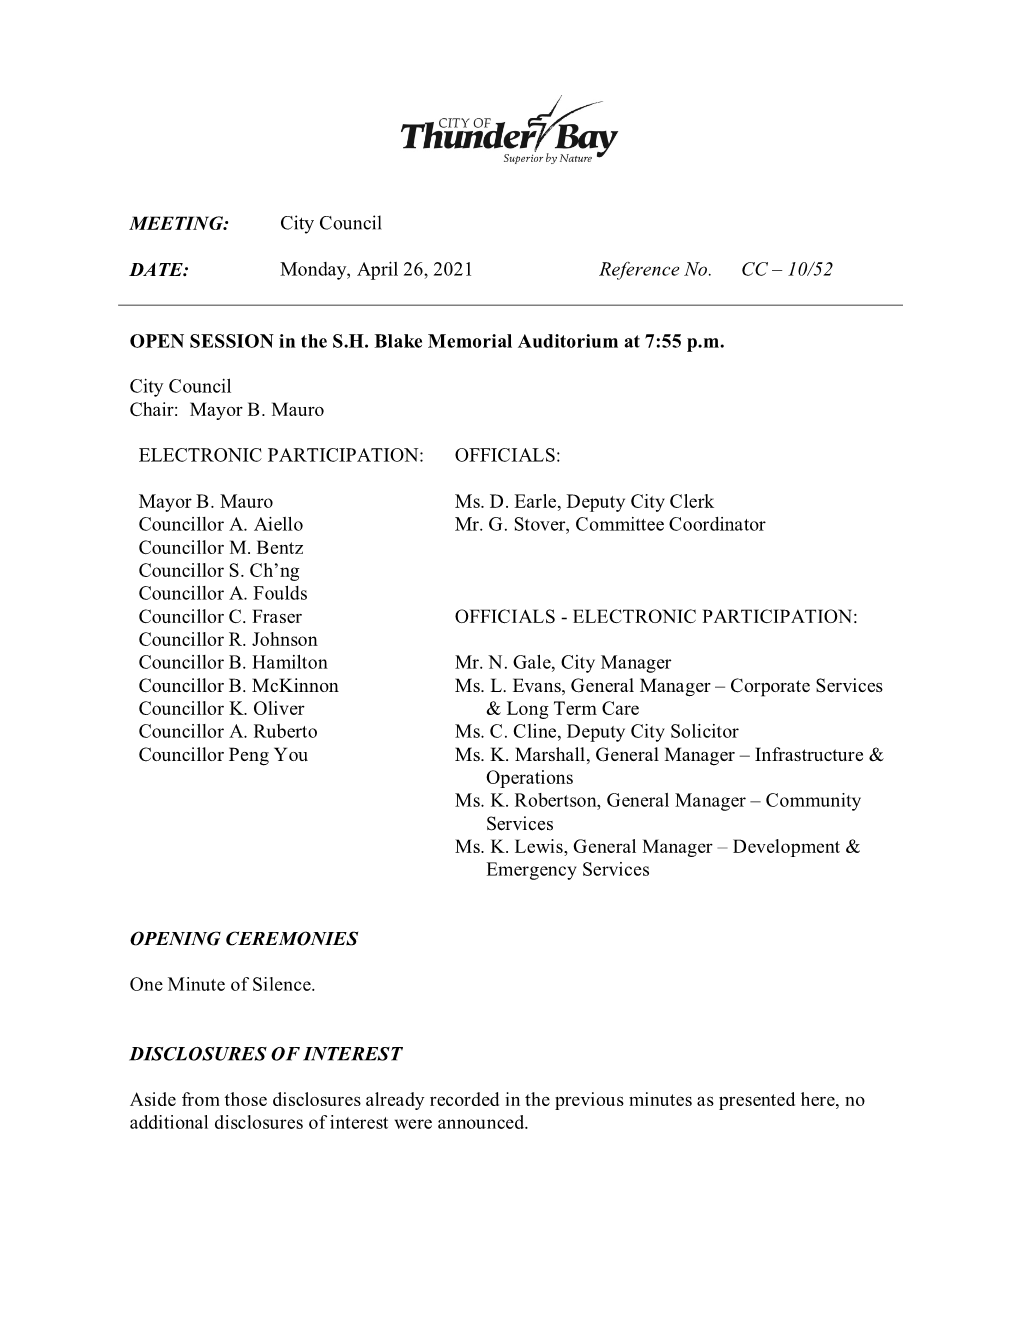 April 26, 2021 City Council Meeting, We Recommend That the Agenda As Printed, Including Any Additional Information and New Business, Be Confirmed